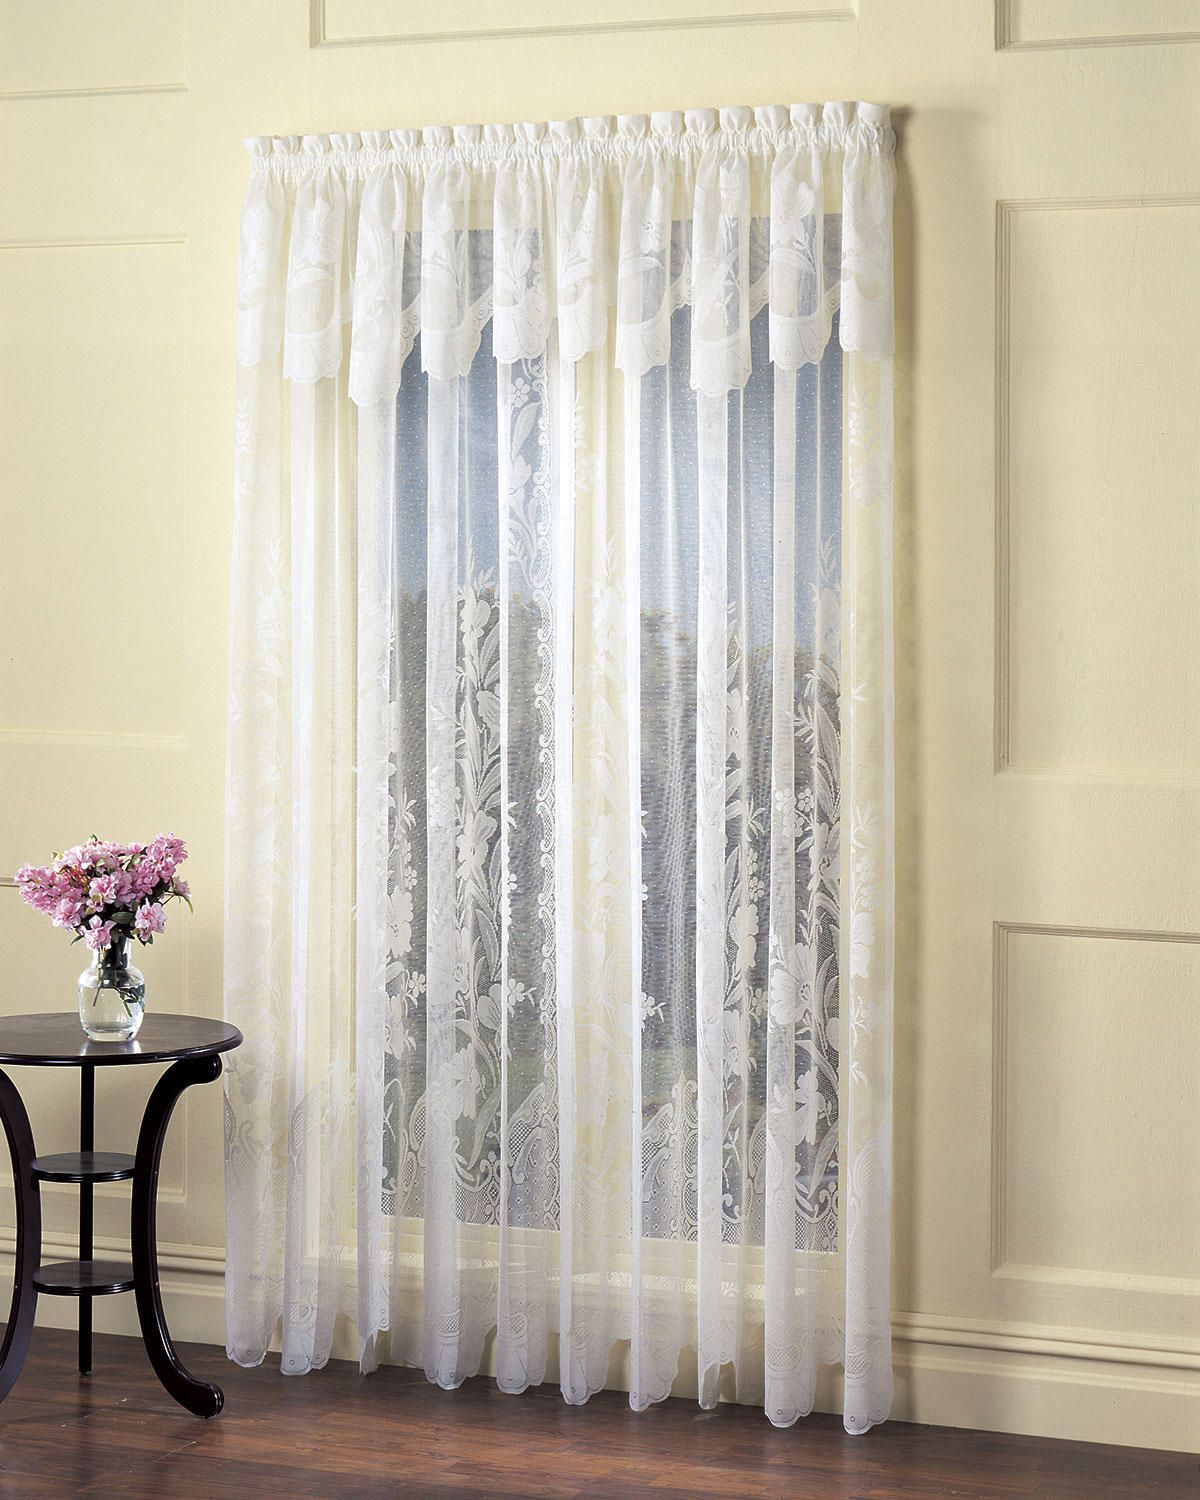 918 Scalloped Lace Panel with Valance | Walmart Canada